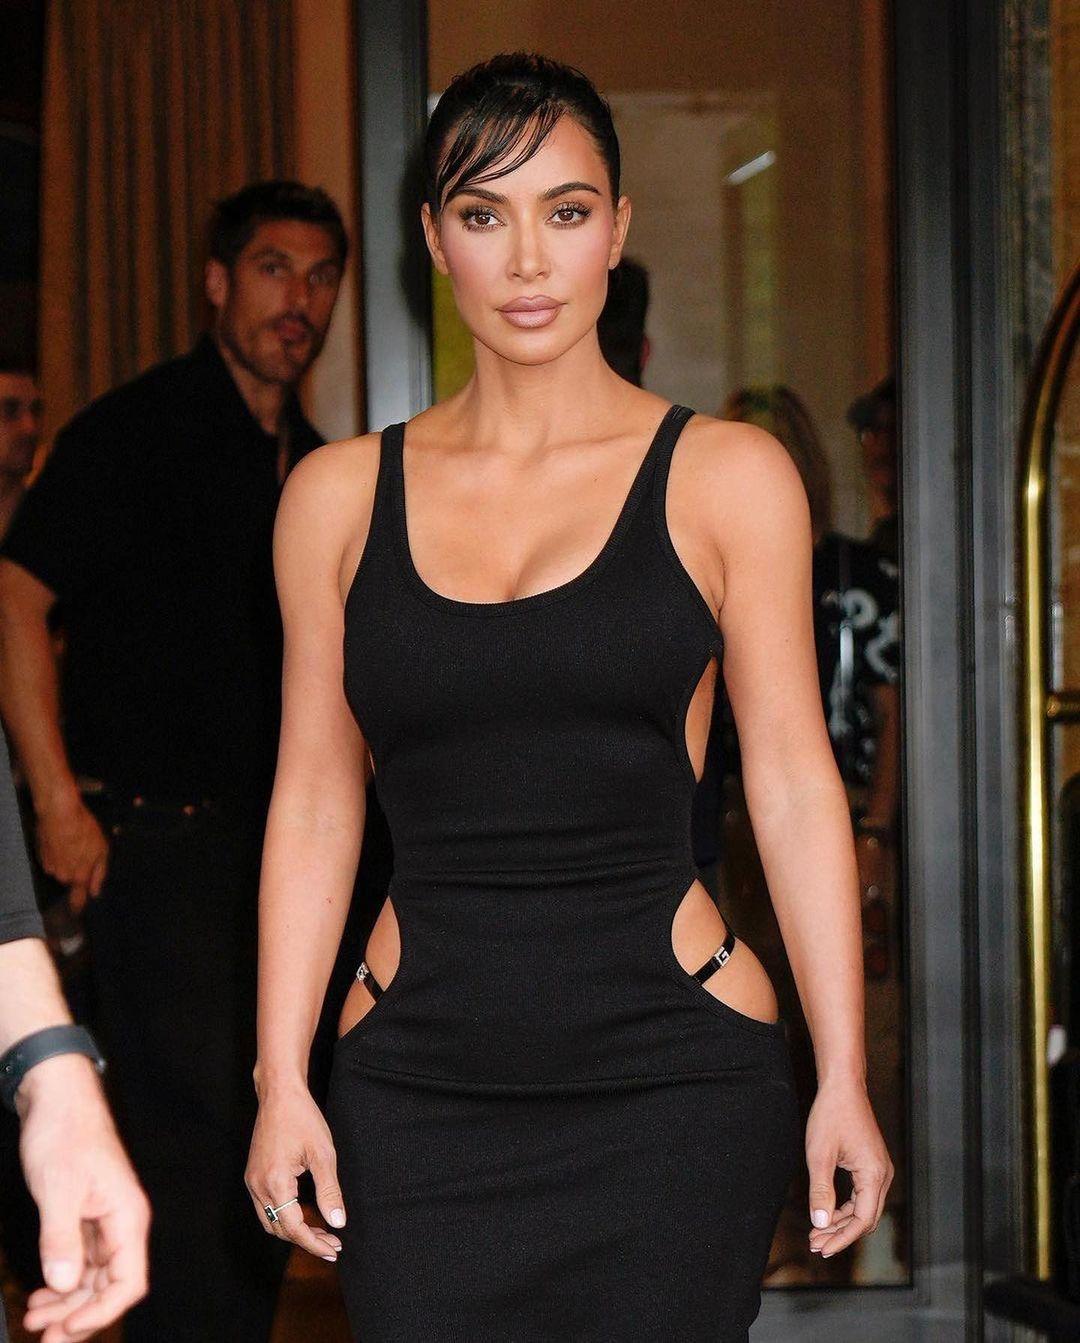 Kim Kardashian says she "winging it" almost every day